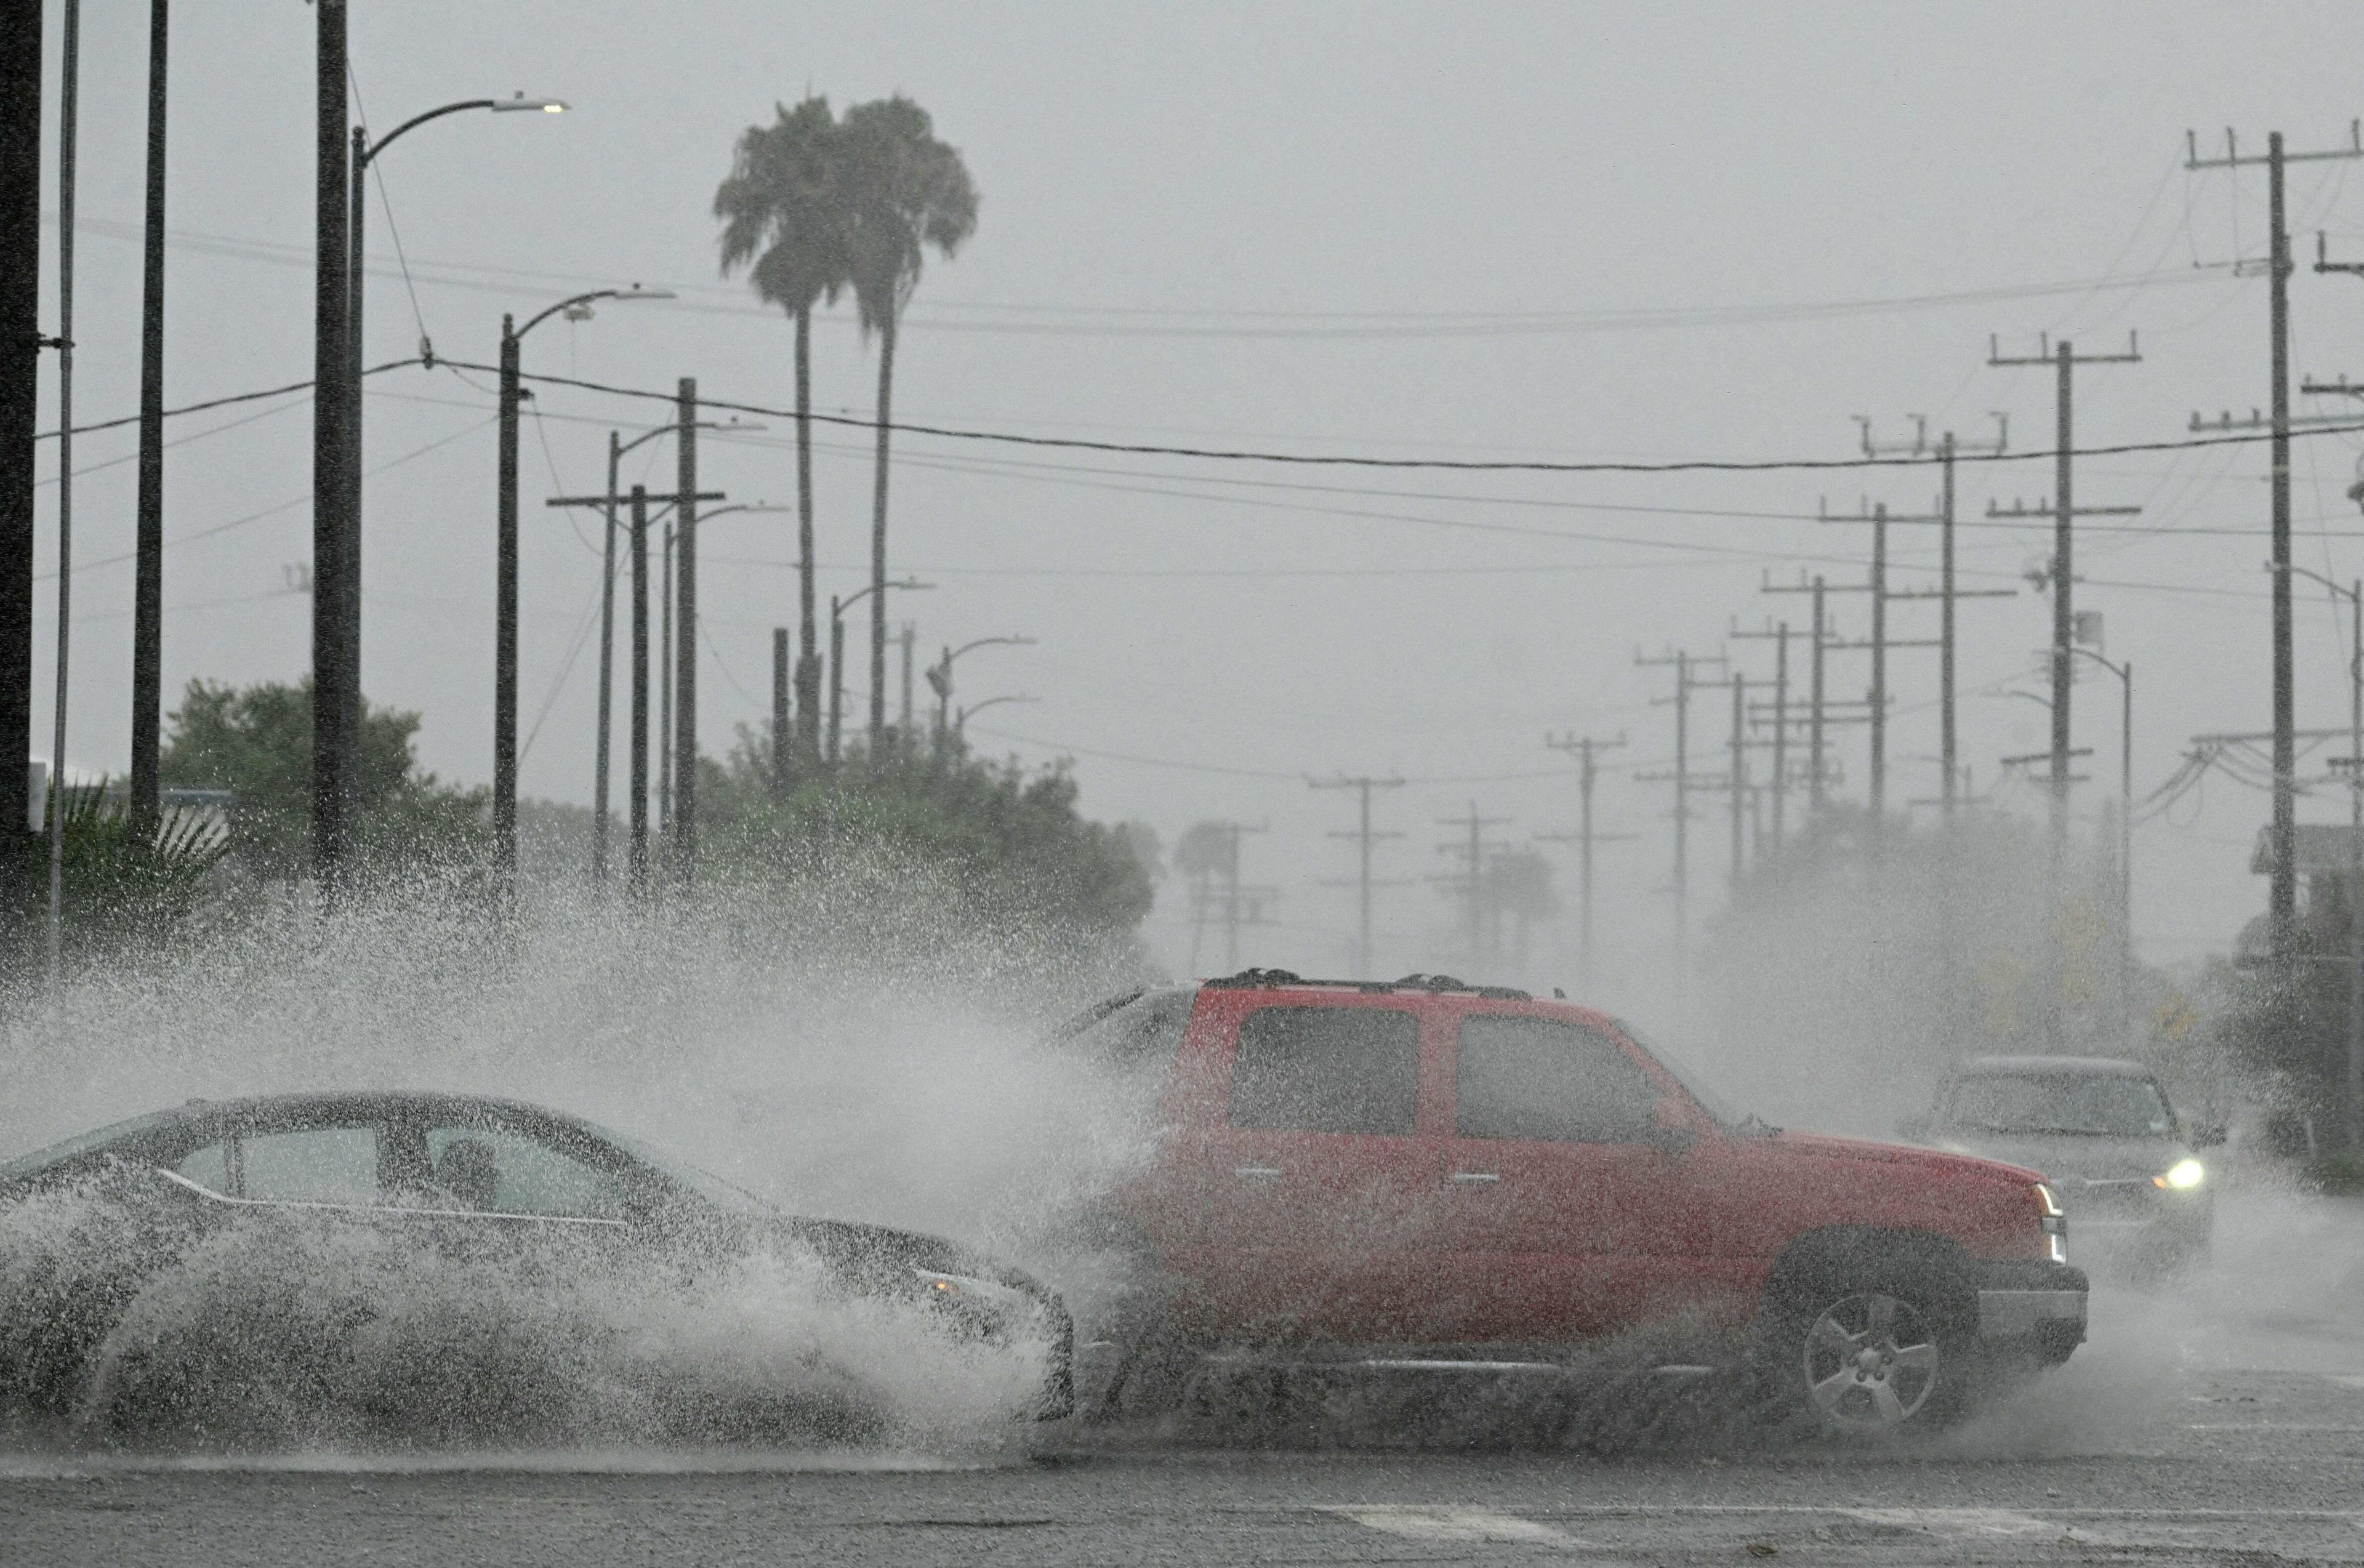 Los Angeles Captures Enough Stormwater During Hurricane Hilary to Serve 50,000 Households